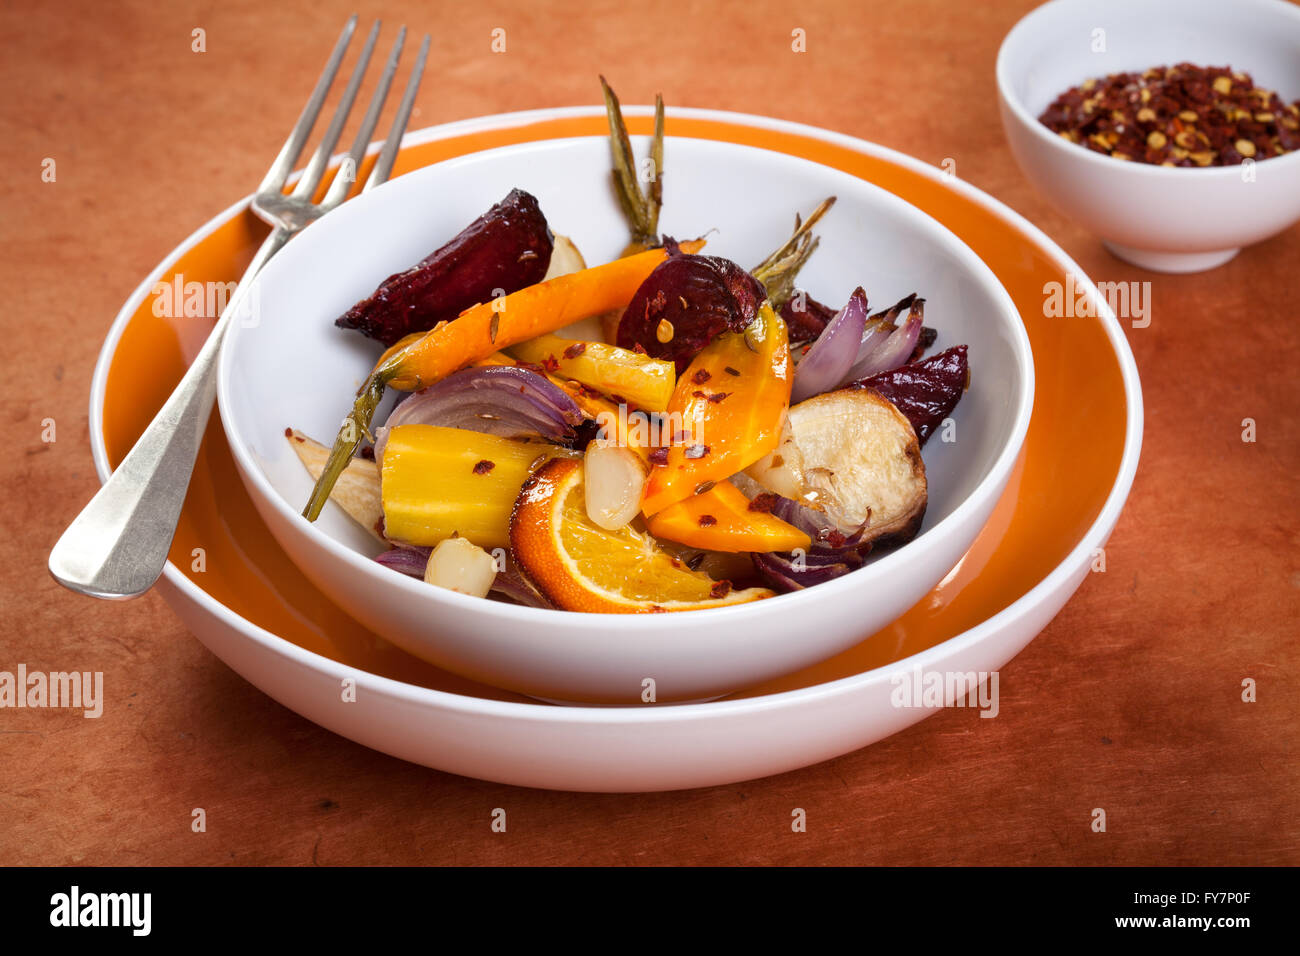 organic oven baked vegetable with spice chilis Stock Photo